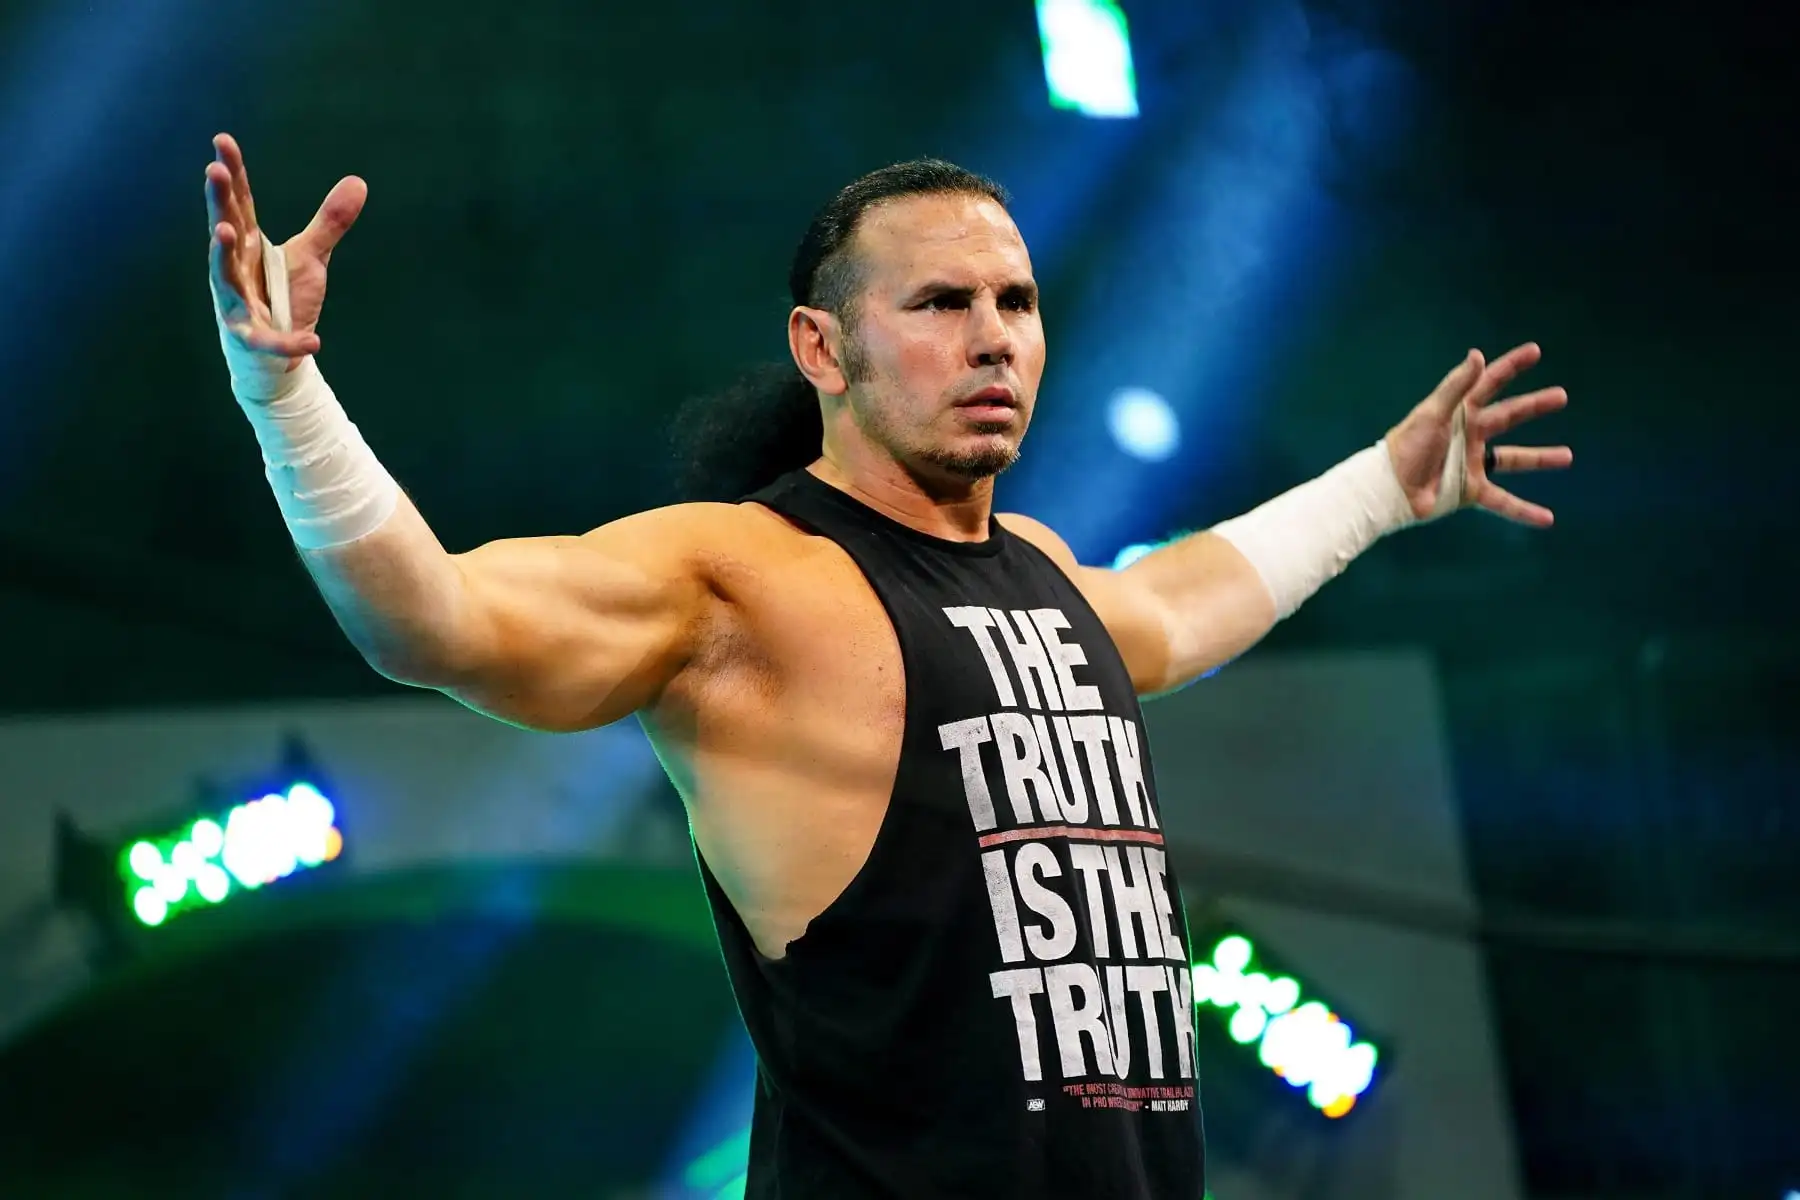 Matt Hardy Discusses His Future Plans After AEW – Striving for the Optimal Destination